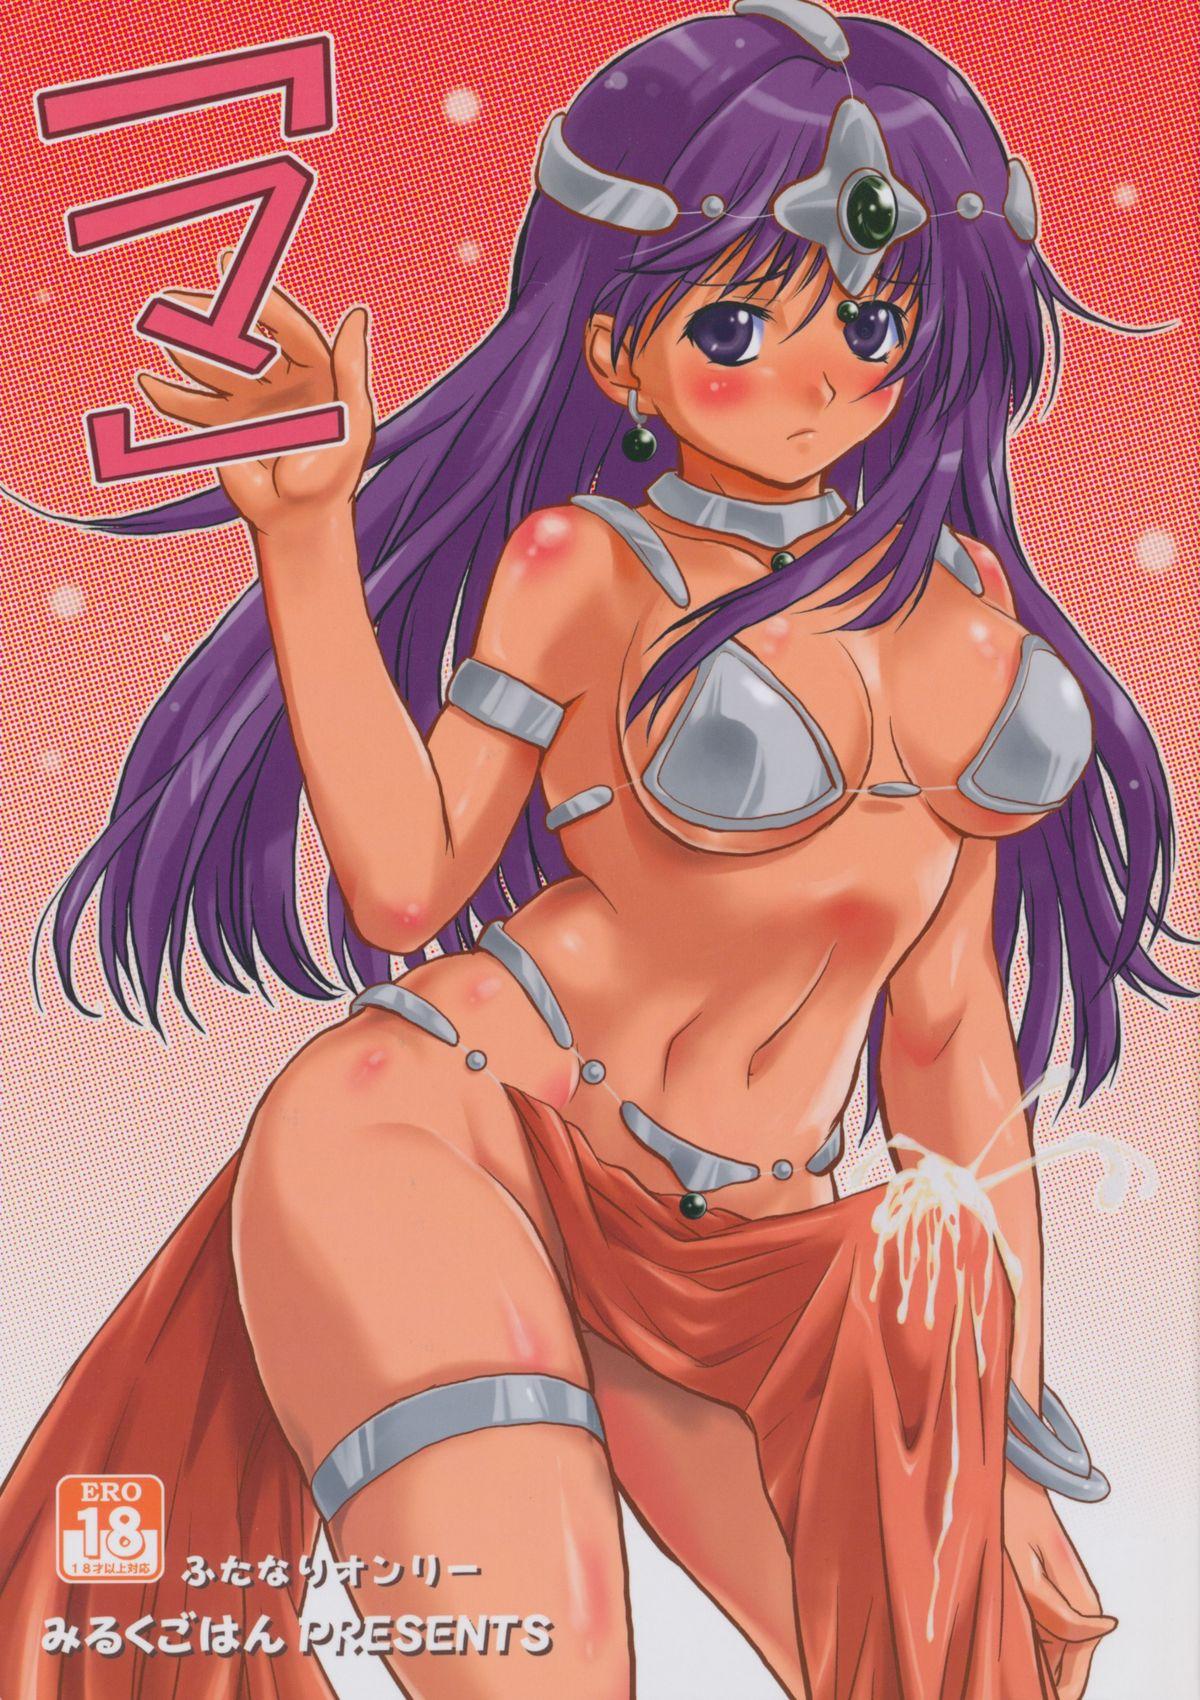 Adult Toys "Ma" - Dragon quest iv Bdsm - Picture 1